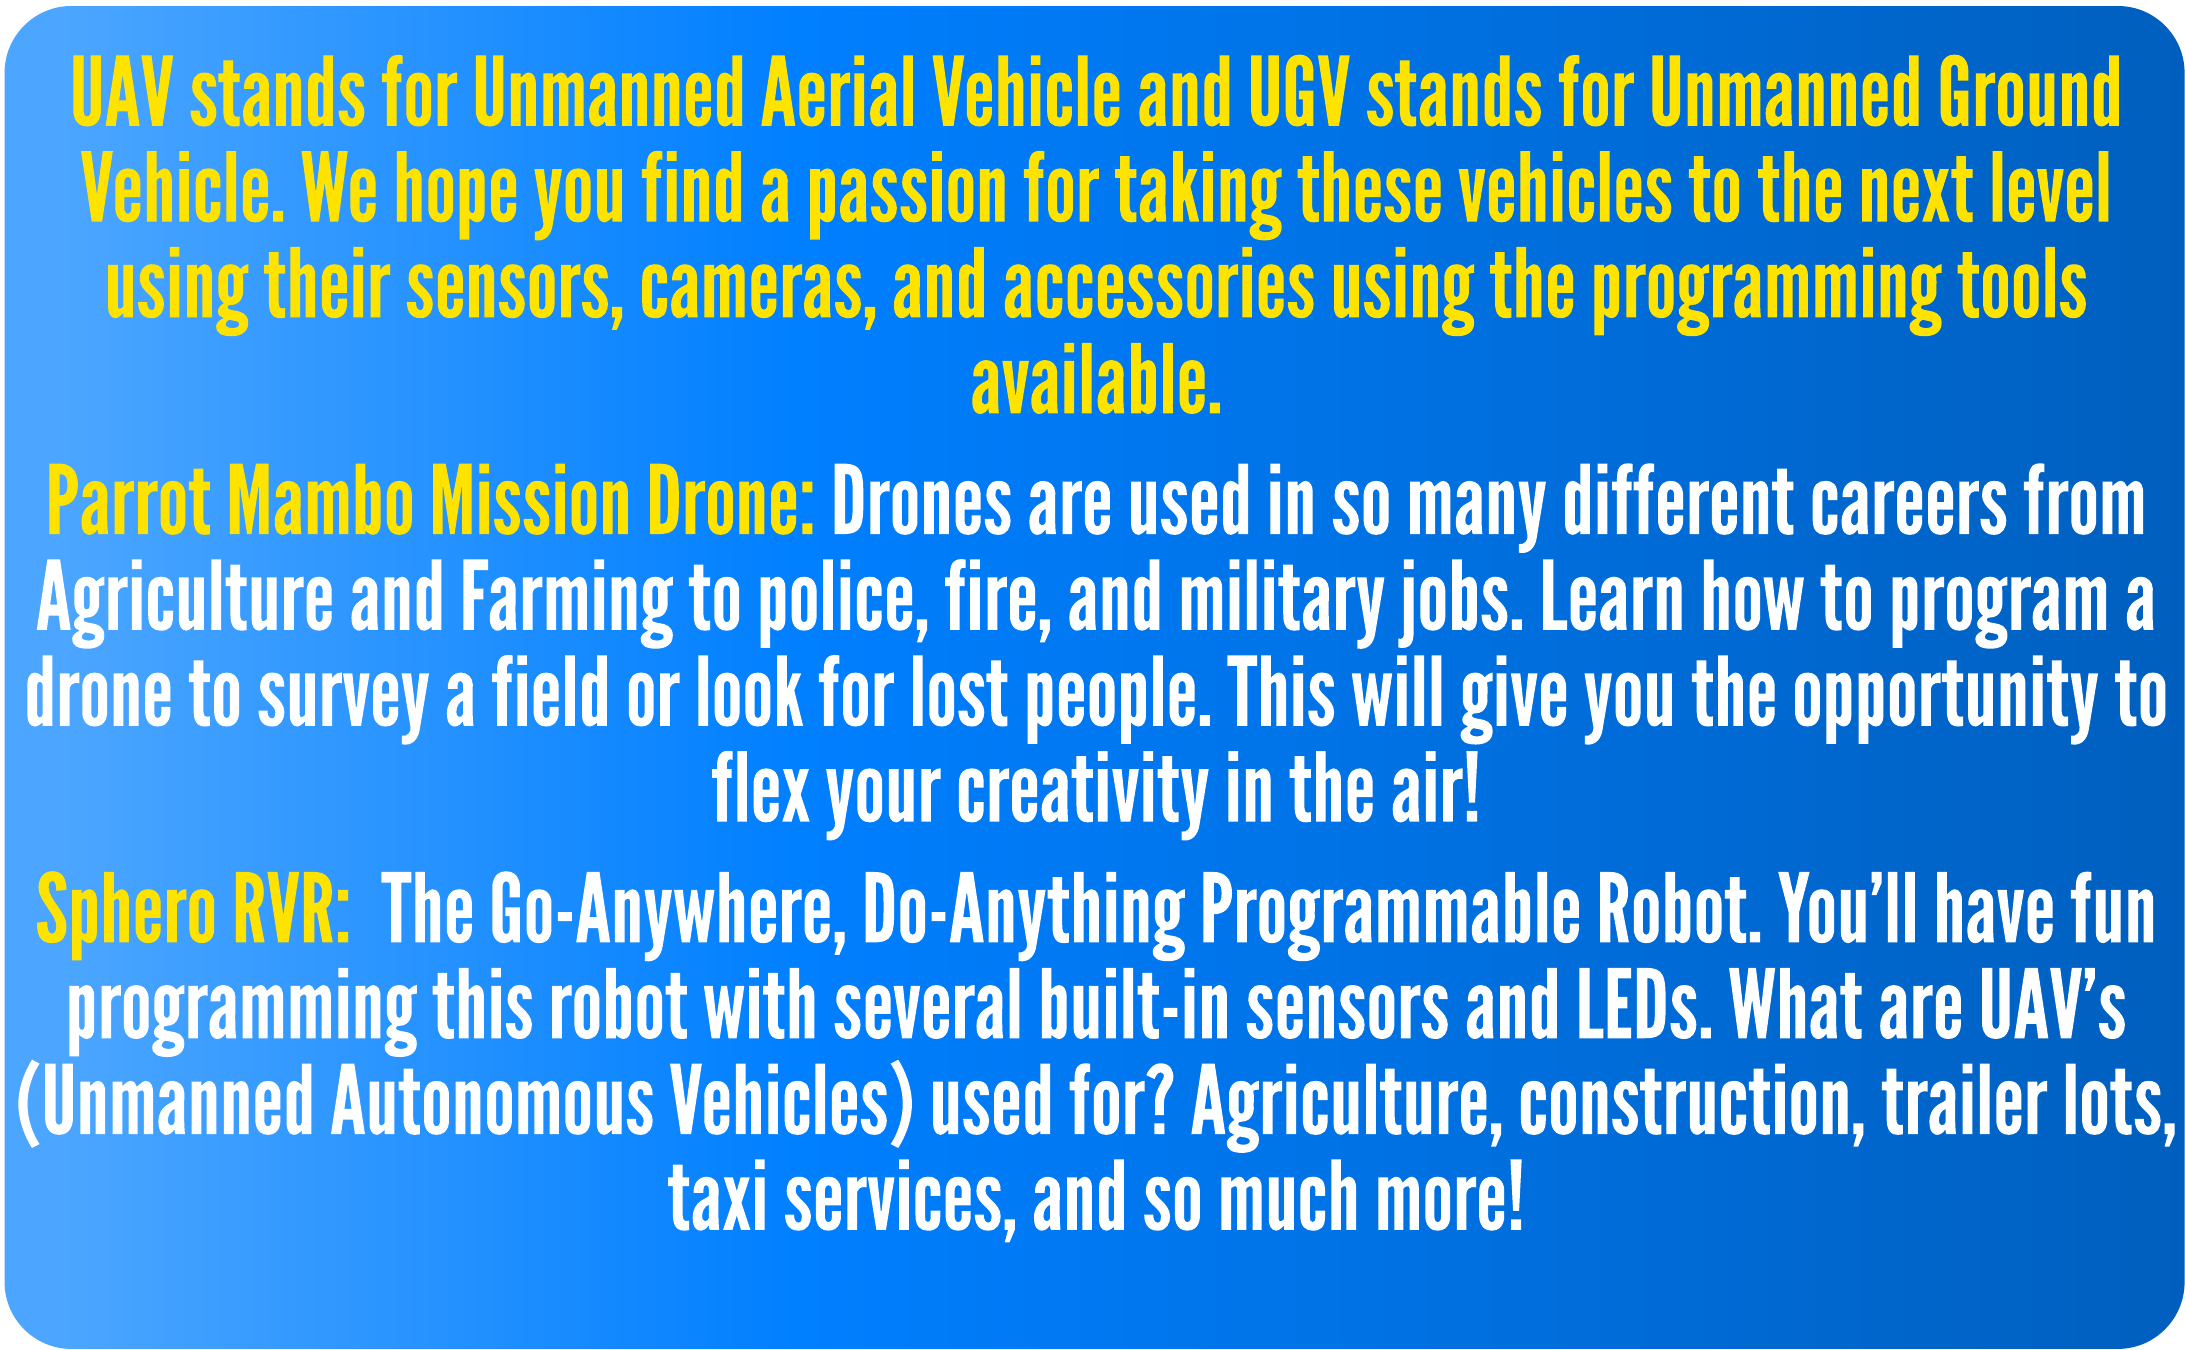 UAV stands for Unmanned Aerial Vehicle and UGV stands for Unmanned Ground Vehicle. We hope you find a passion for taking these vehicles to the next level using their sensors, cameras, and accessories using the programming tools available.  Parrot Mambo Mission Drone: Drones are used in so many different careers from Agriculture and Farming to police, fire, and military jobs. Learn how to program a drone to survey a field or look for lost people. This will give you the opportunity to flex your creativity in the air!  Sphero RVR: The Go-Anywhere, Do-Anything Programmable Robot. You'll have fun programming this robot with several built-in sensors and LEDs. What are UAV's (Unmanned Autonomous Vehicles) used for? Agriculture, construction, trailer lots, taxi services, and so much more!